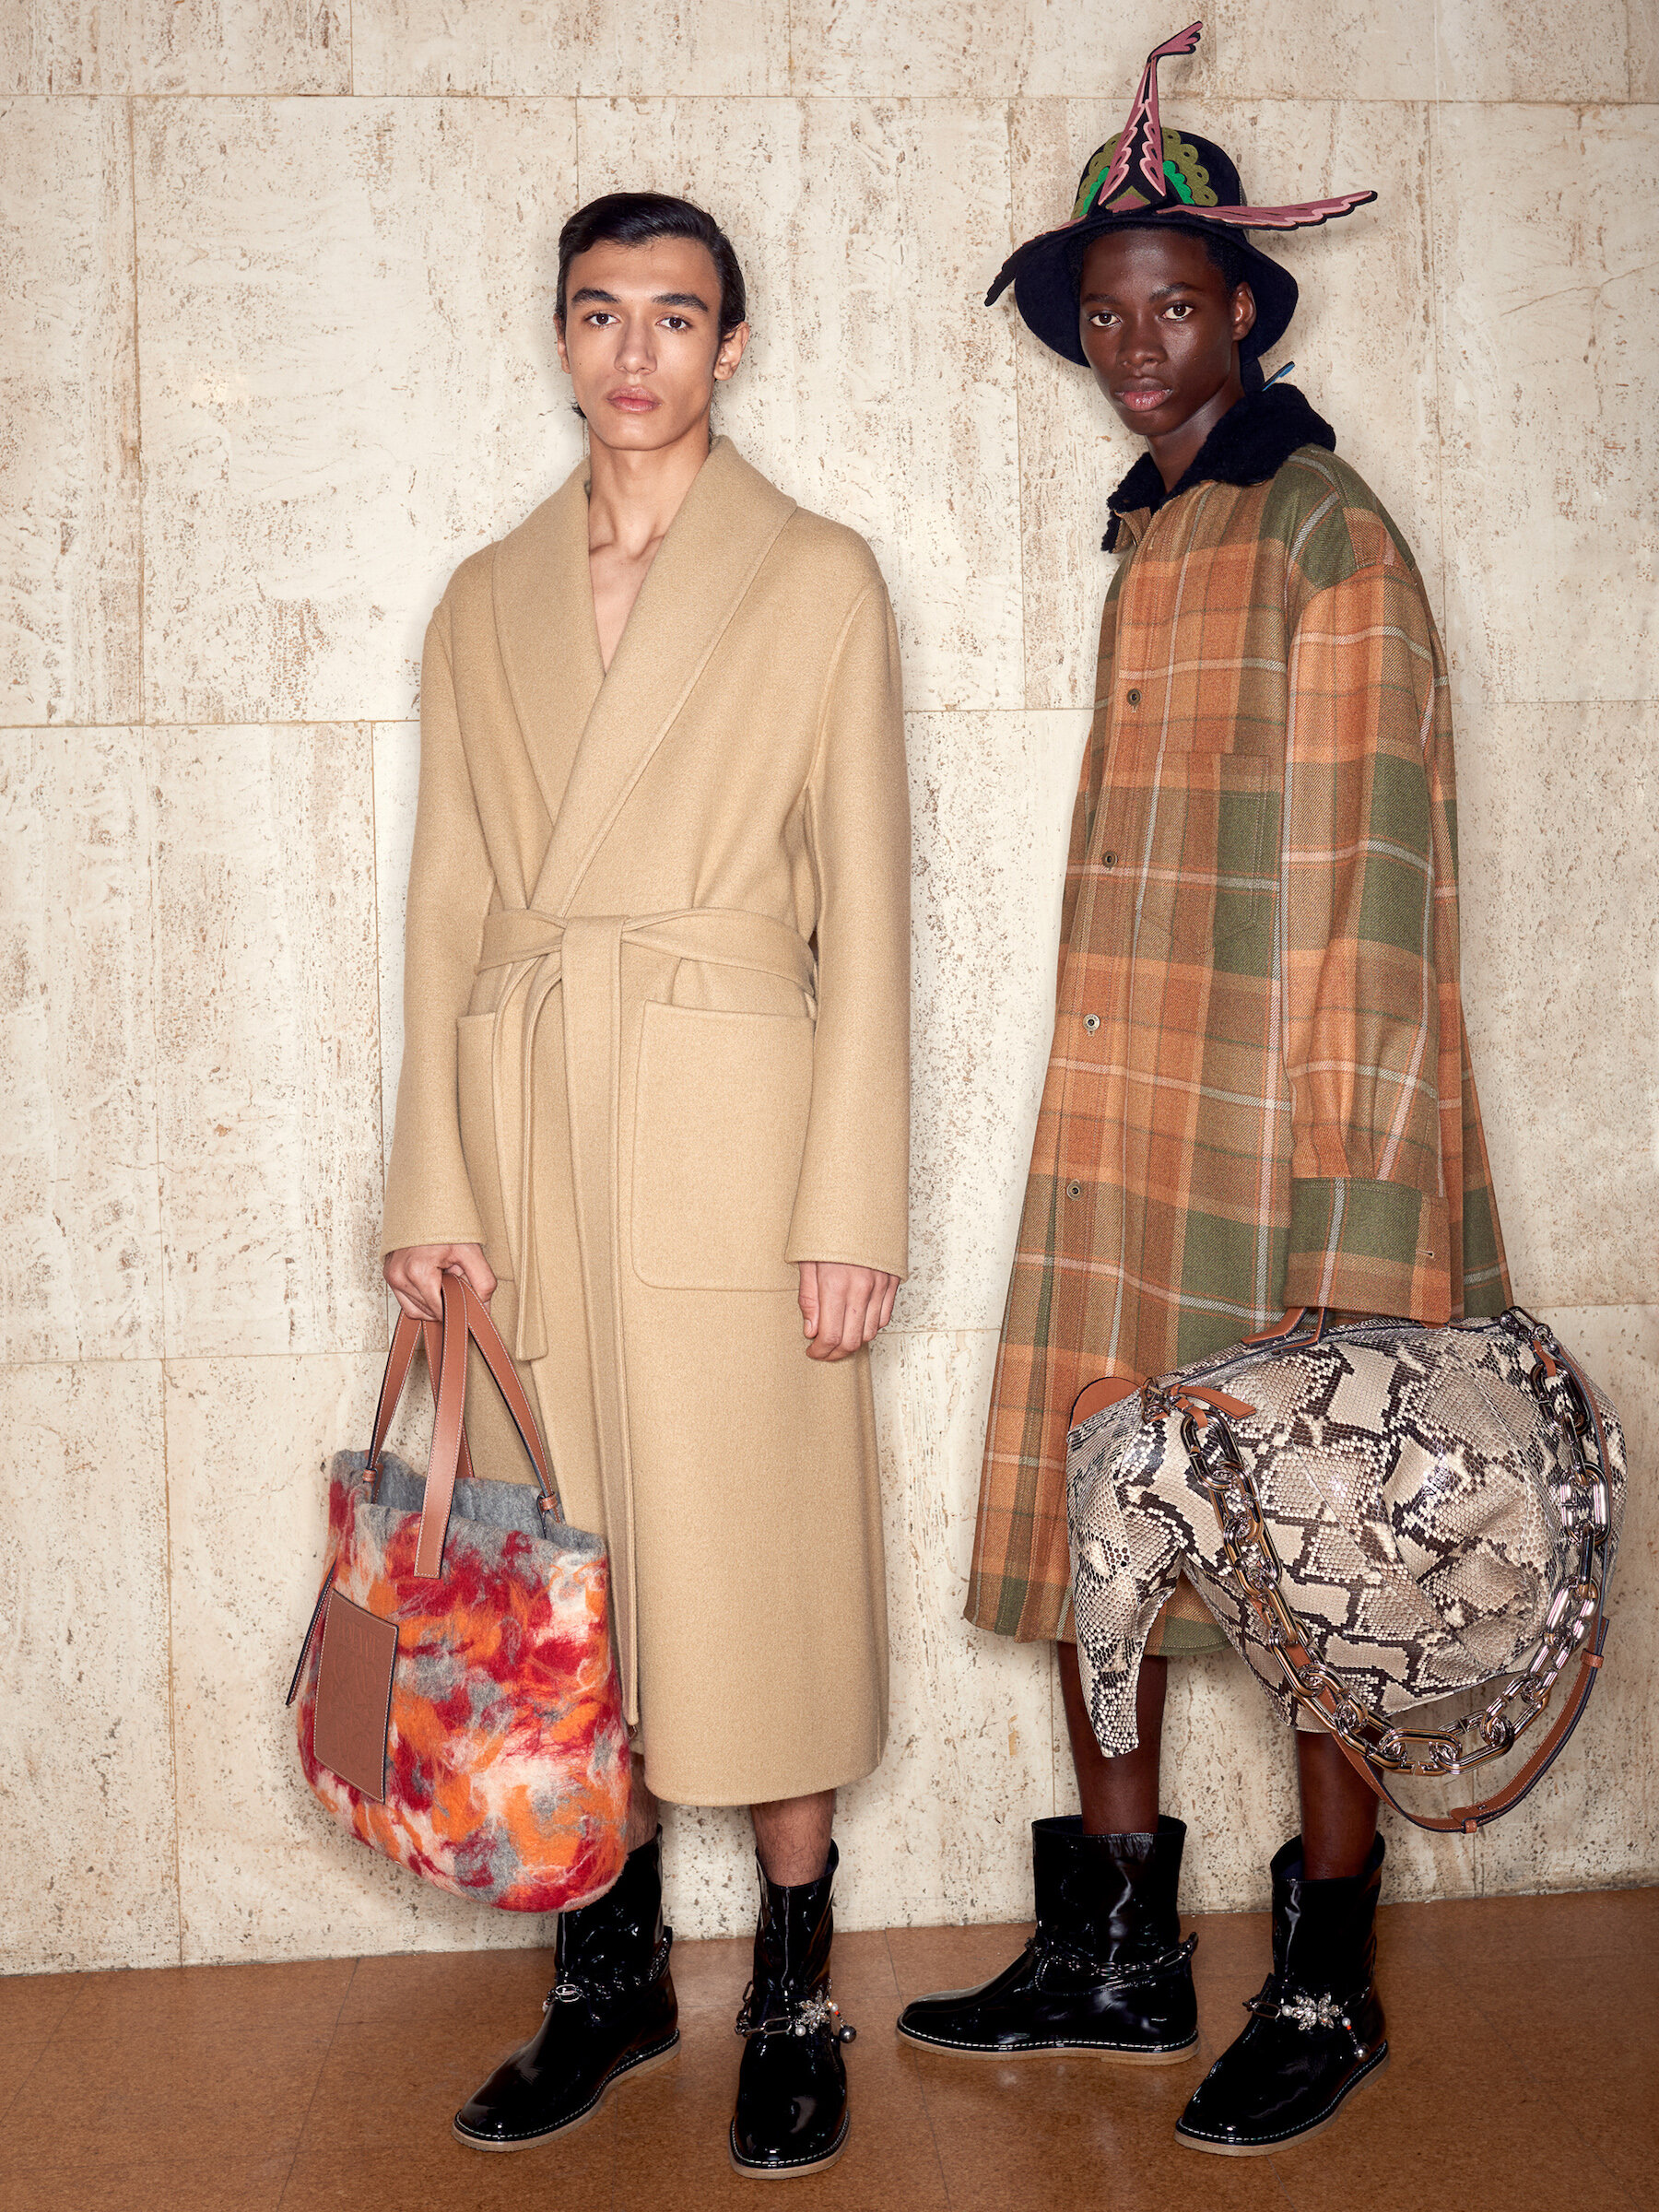 Backstage At The Loewe Men's Fall Winter 2020 — SSI Life